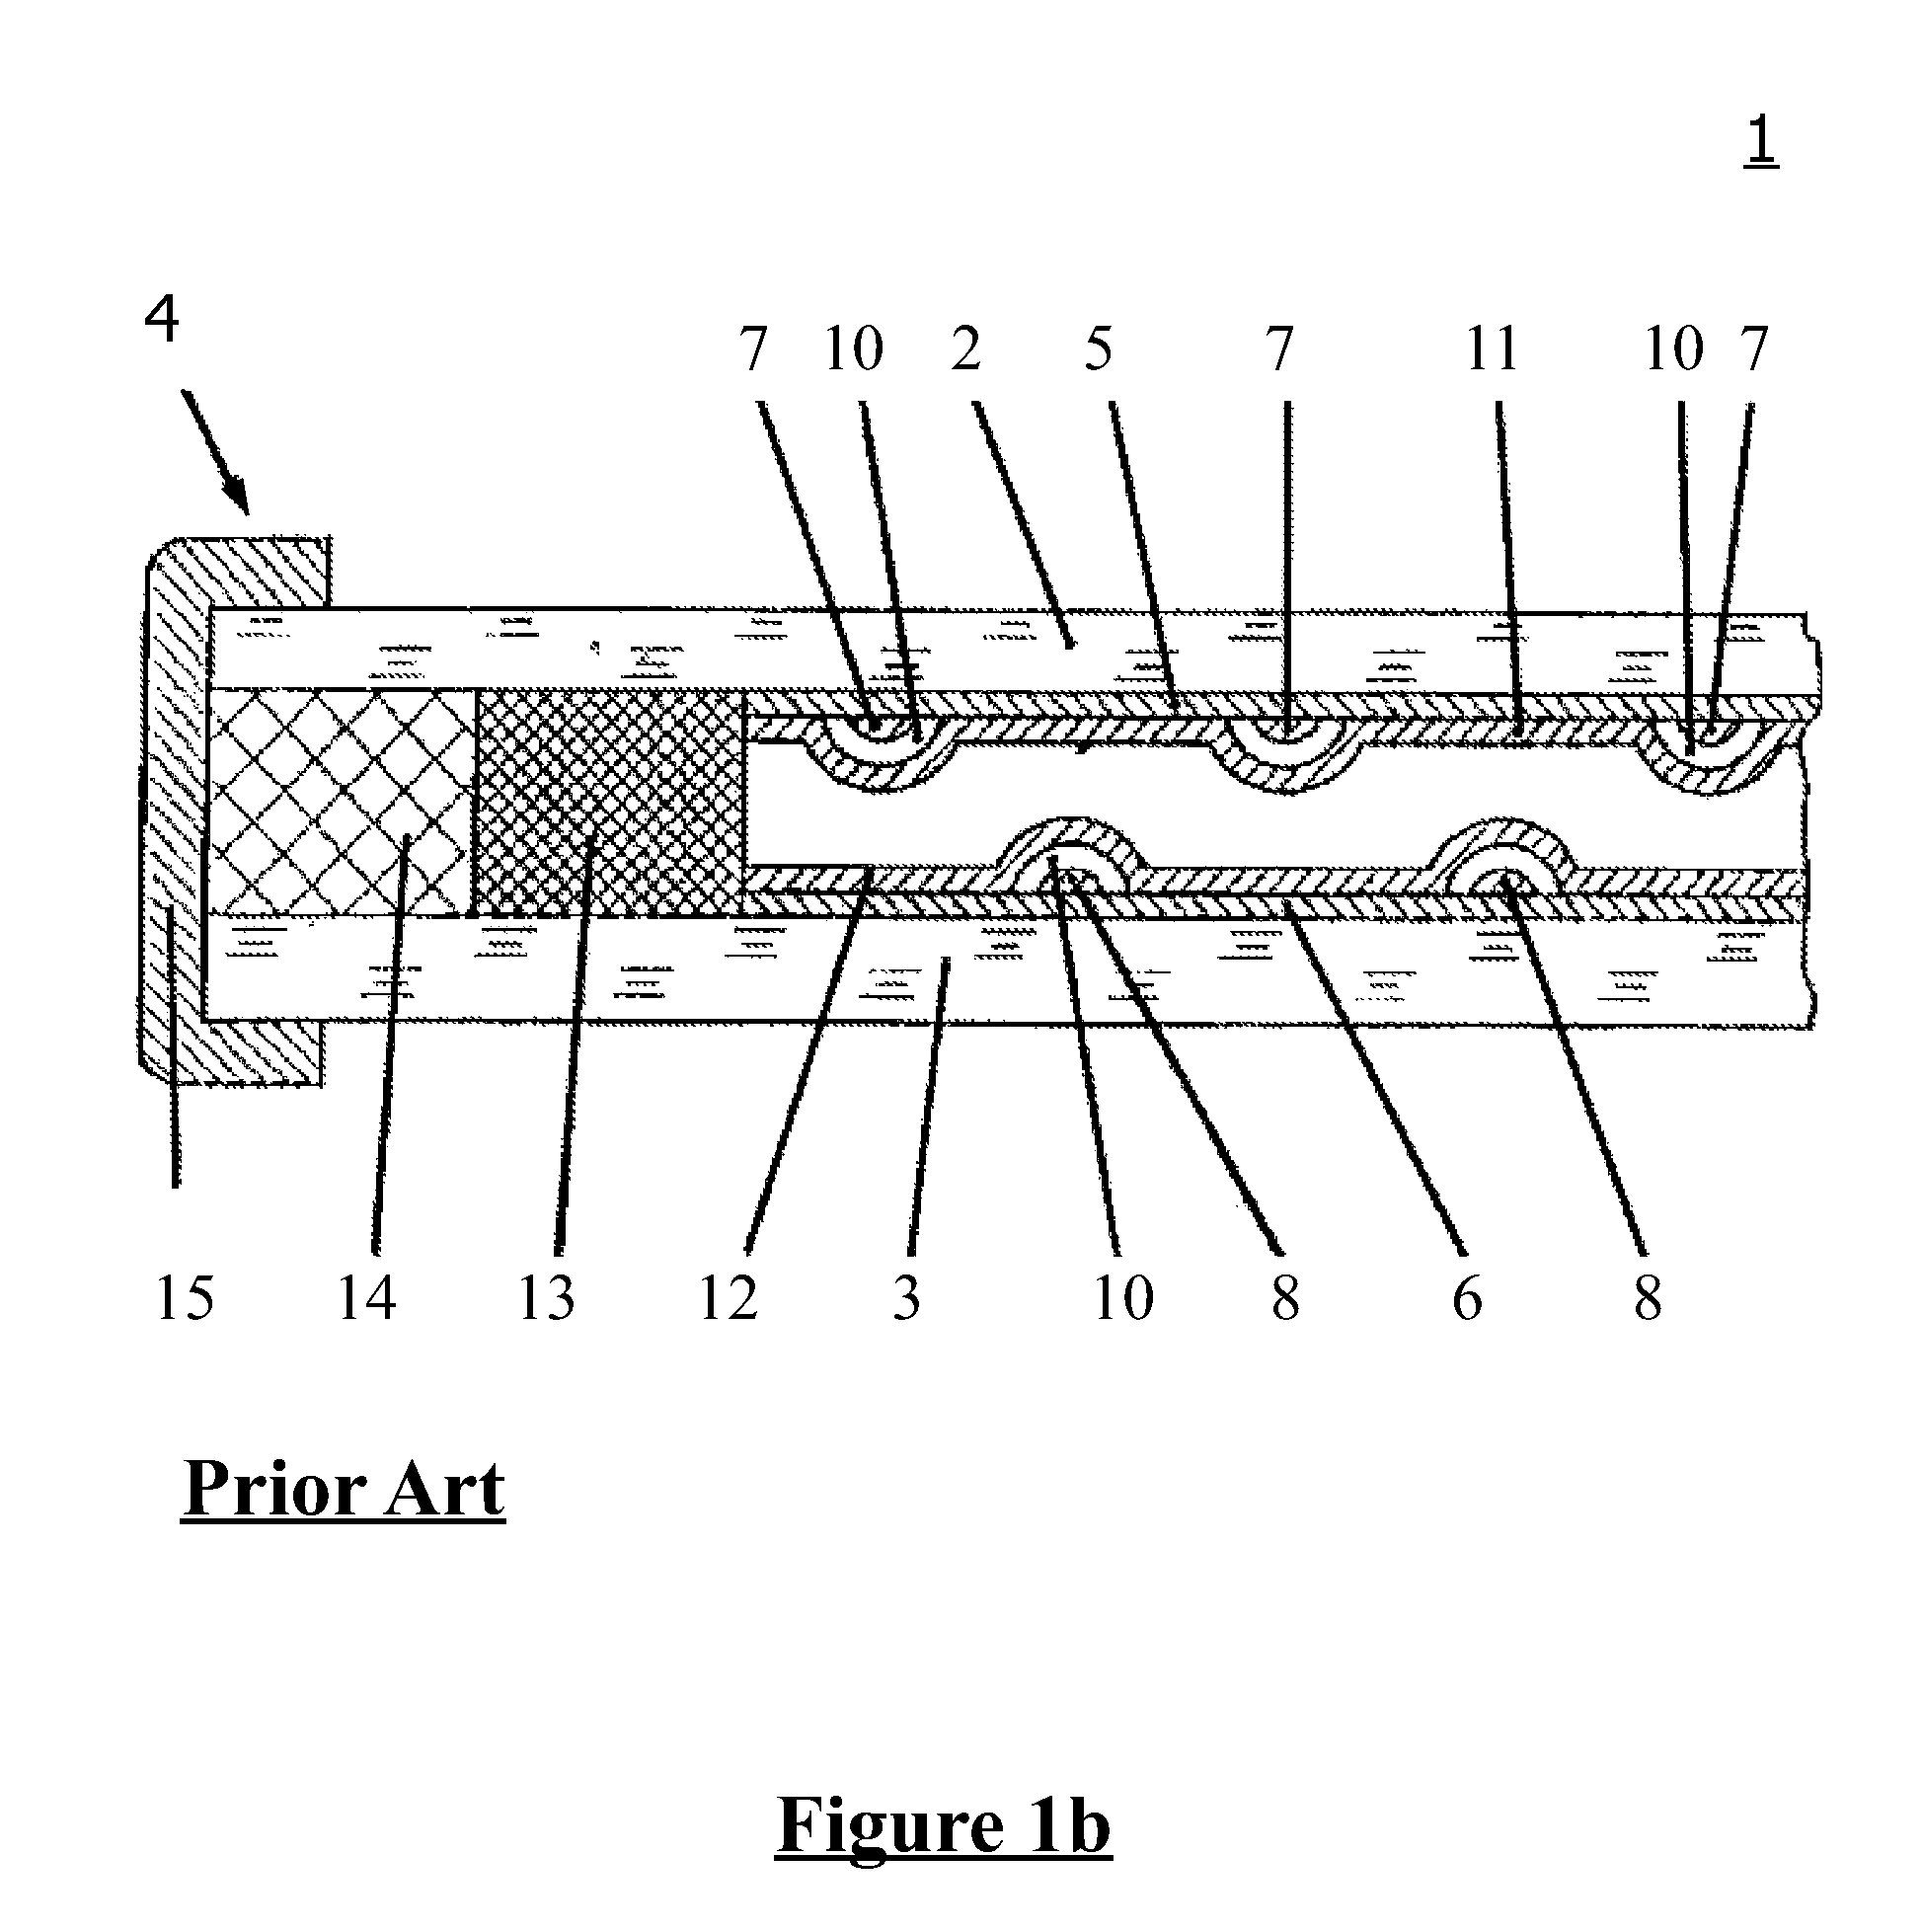 Solar cell device